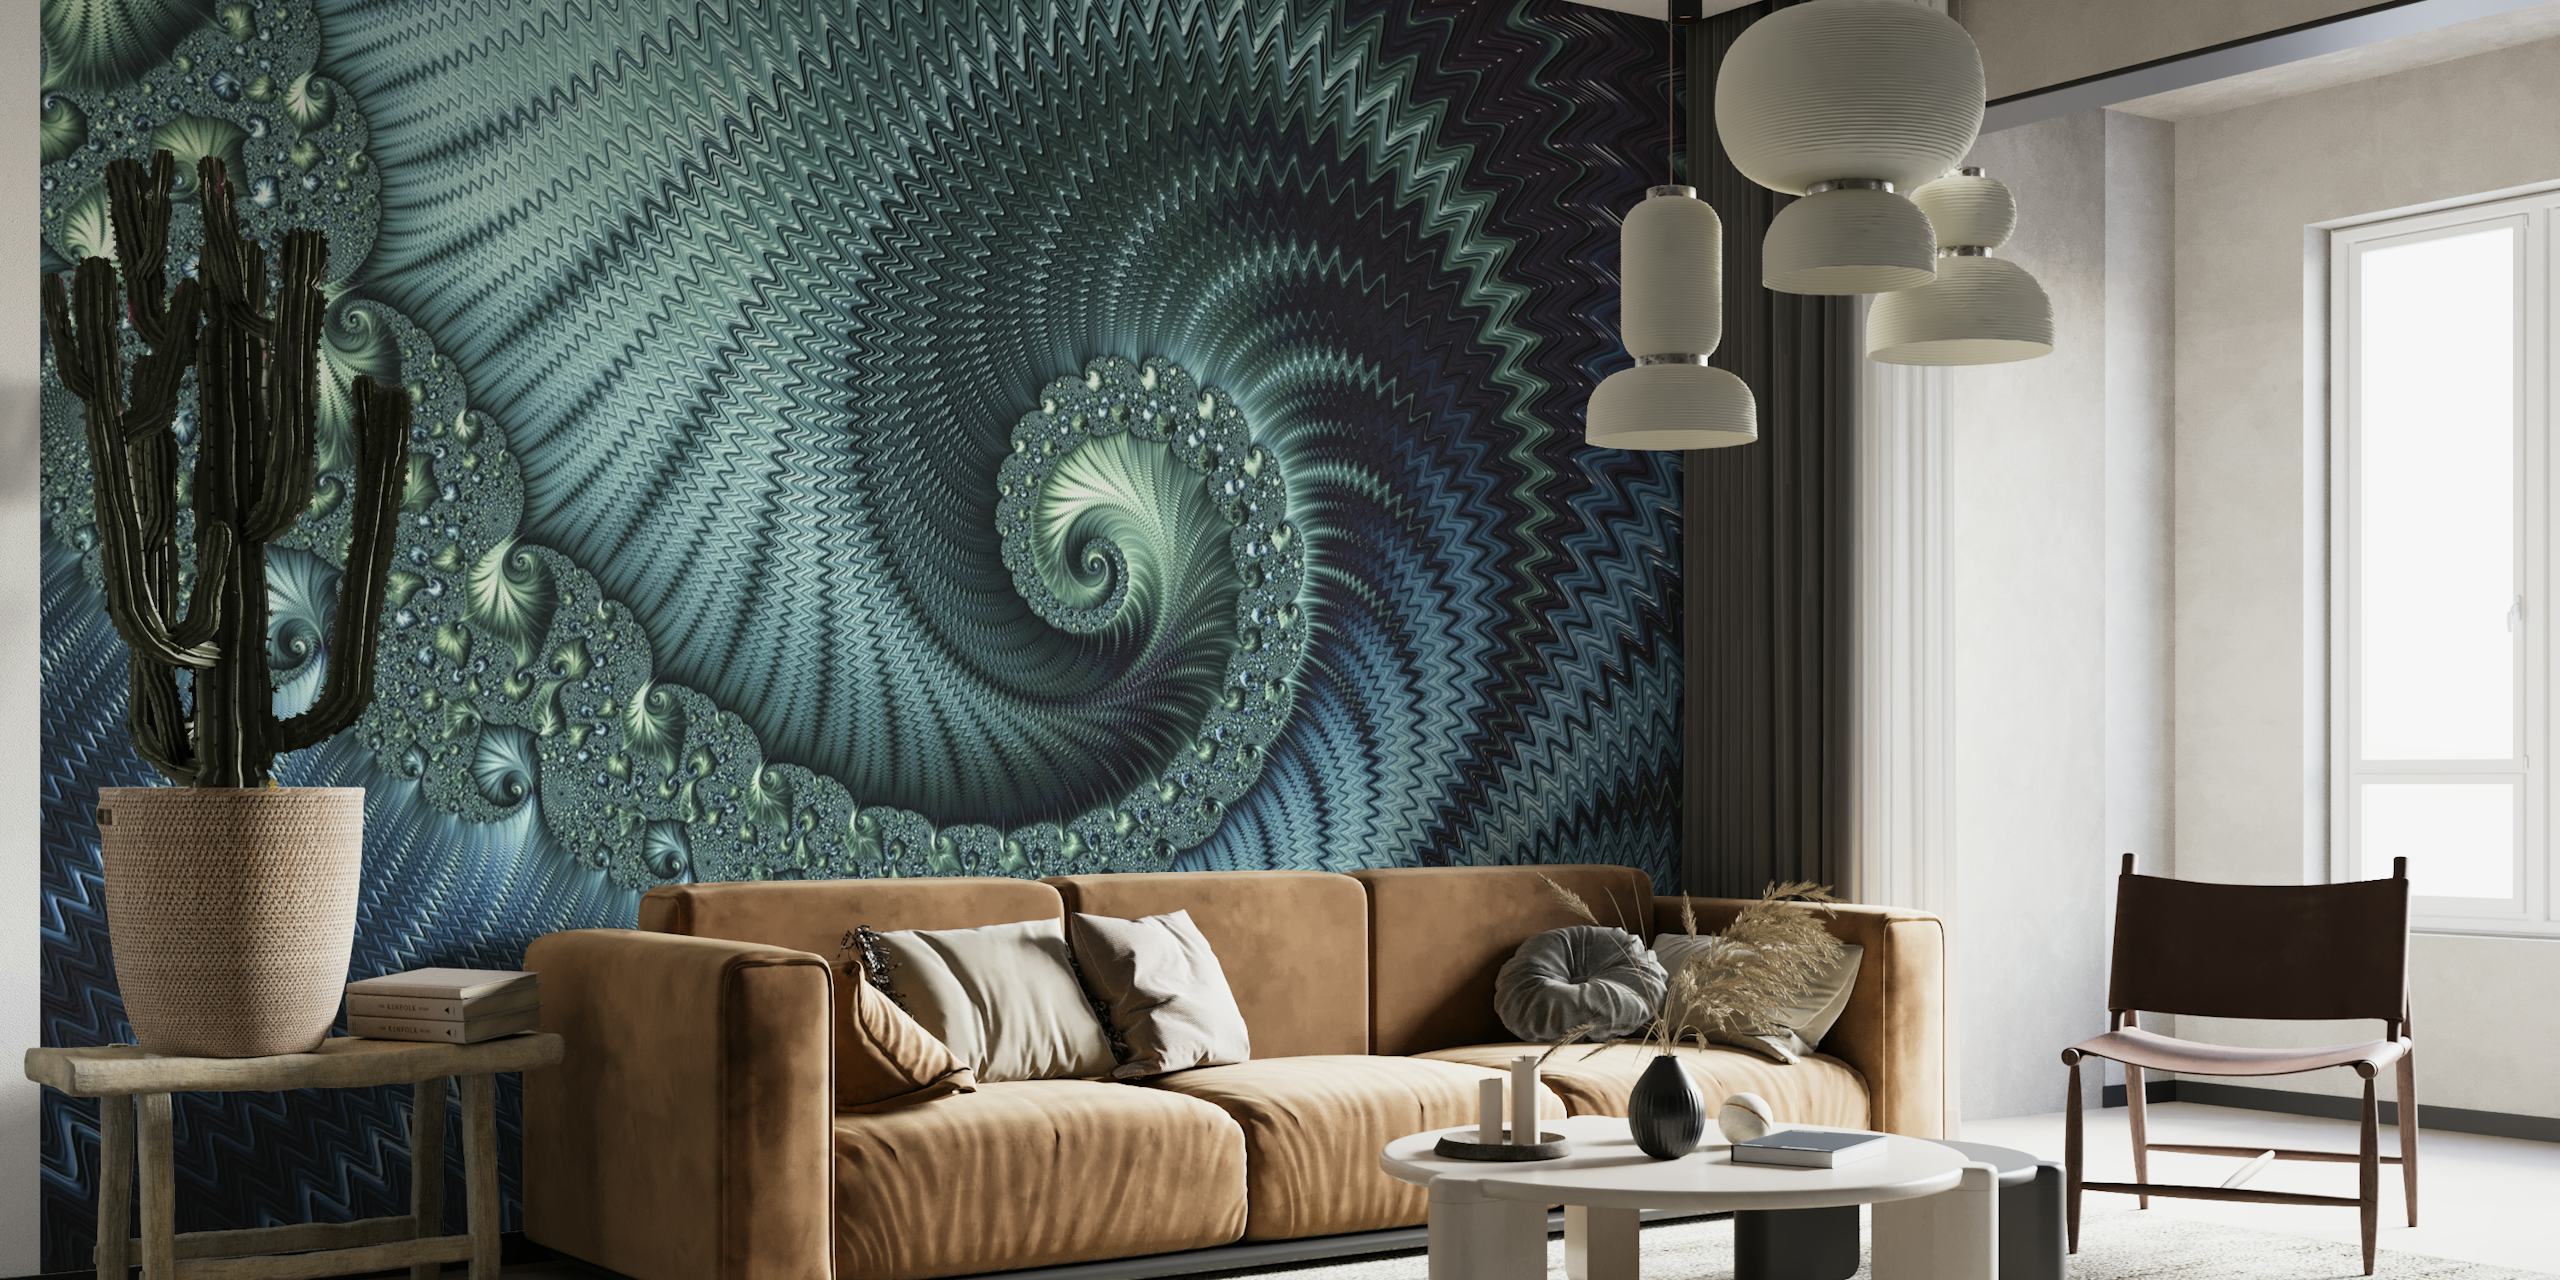 Abstract fractal spiral wall mural with intricate patterns